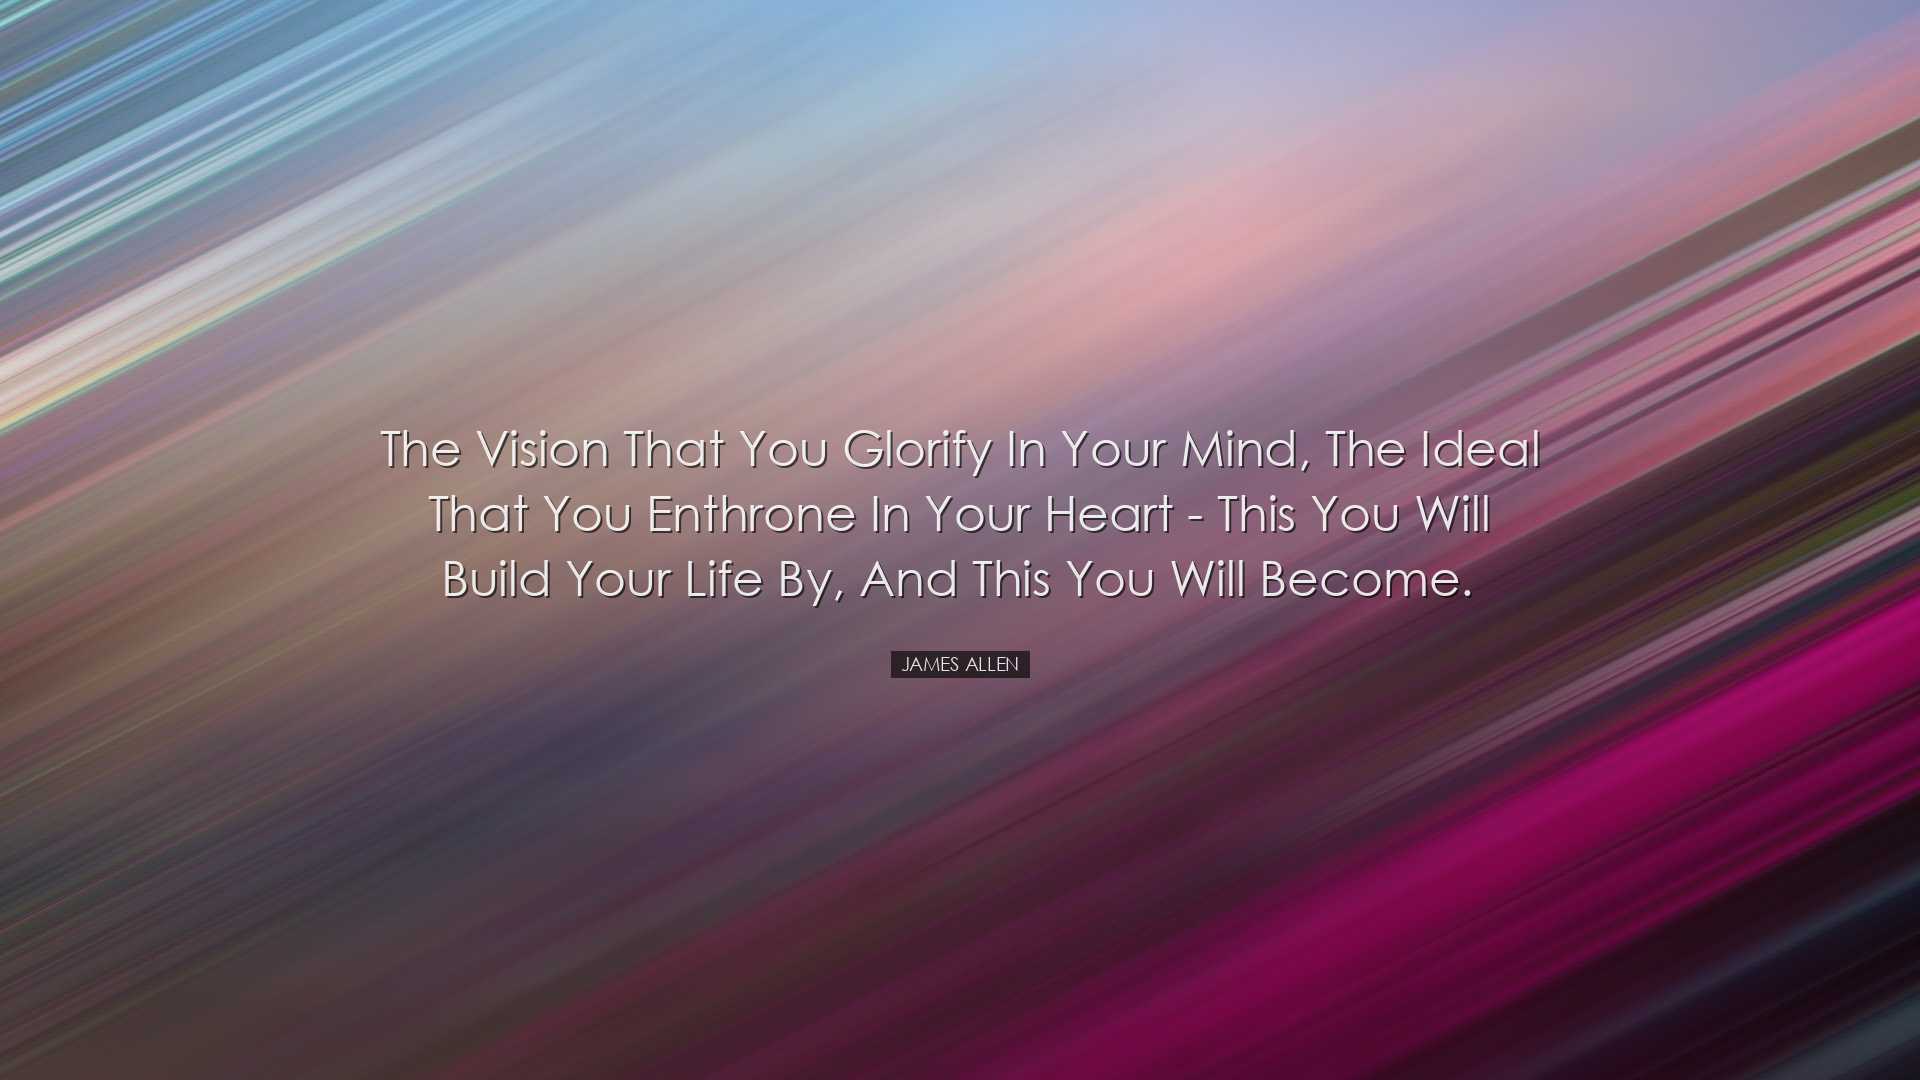 The vision that you glorify in your mind, the ideal that you enthr